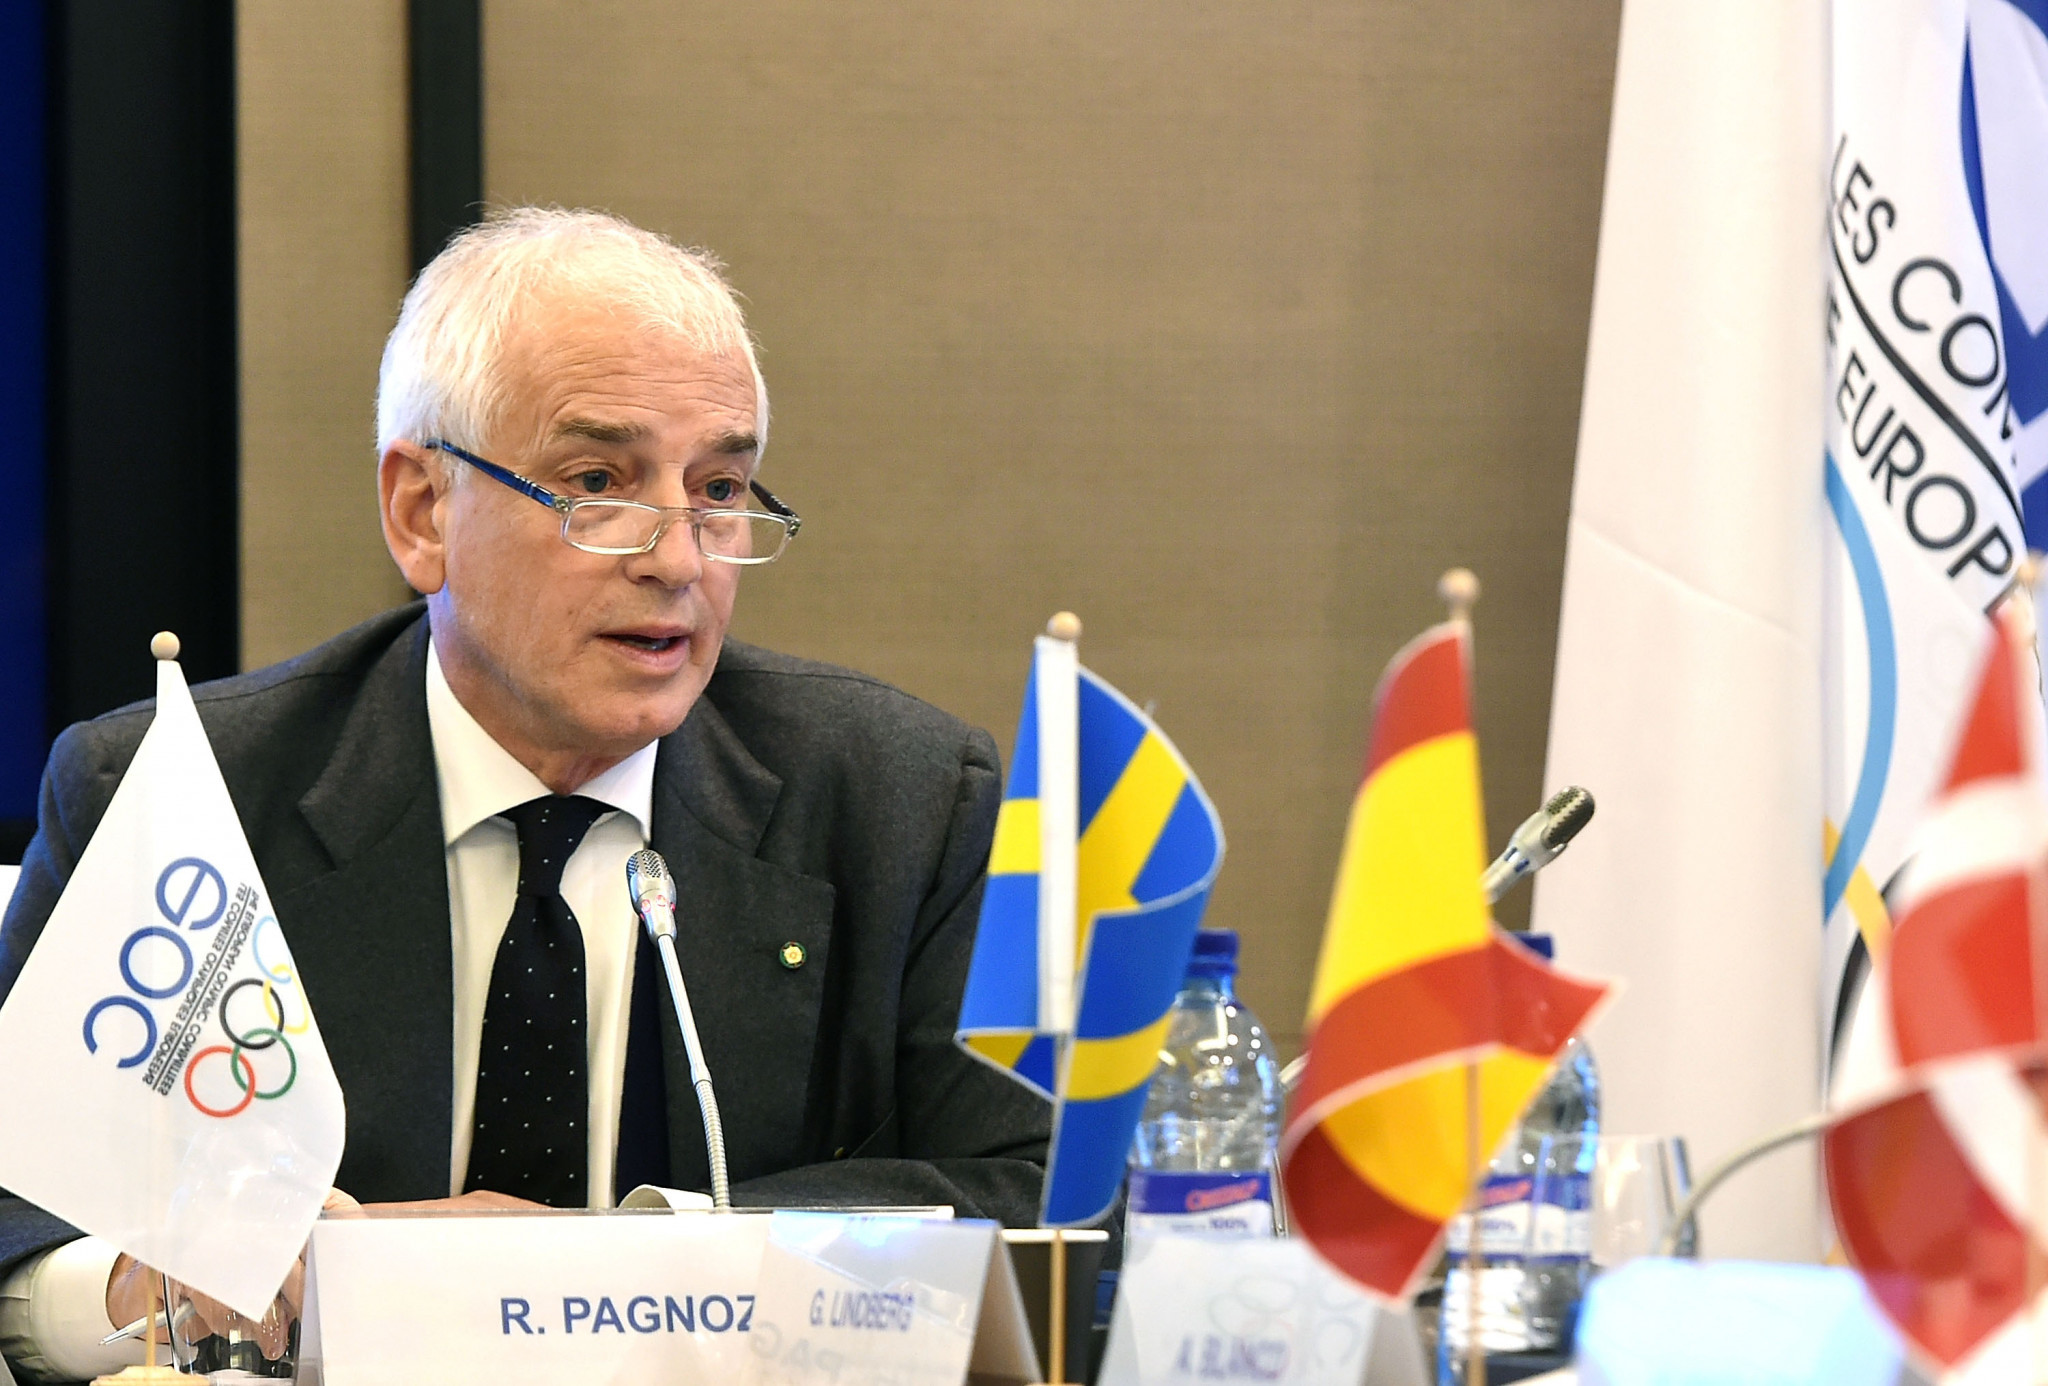 EOC secretary general Raffaele Pagnozzi announced the formation of the "dispute-resolution committee" at the EOC Executive Committee meeting in Slovakia ©Getty Images